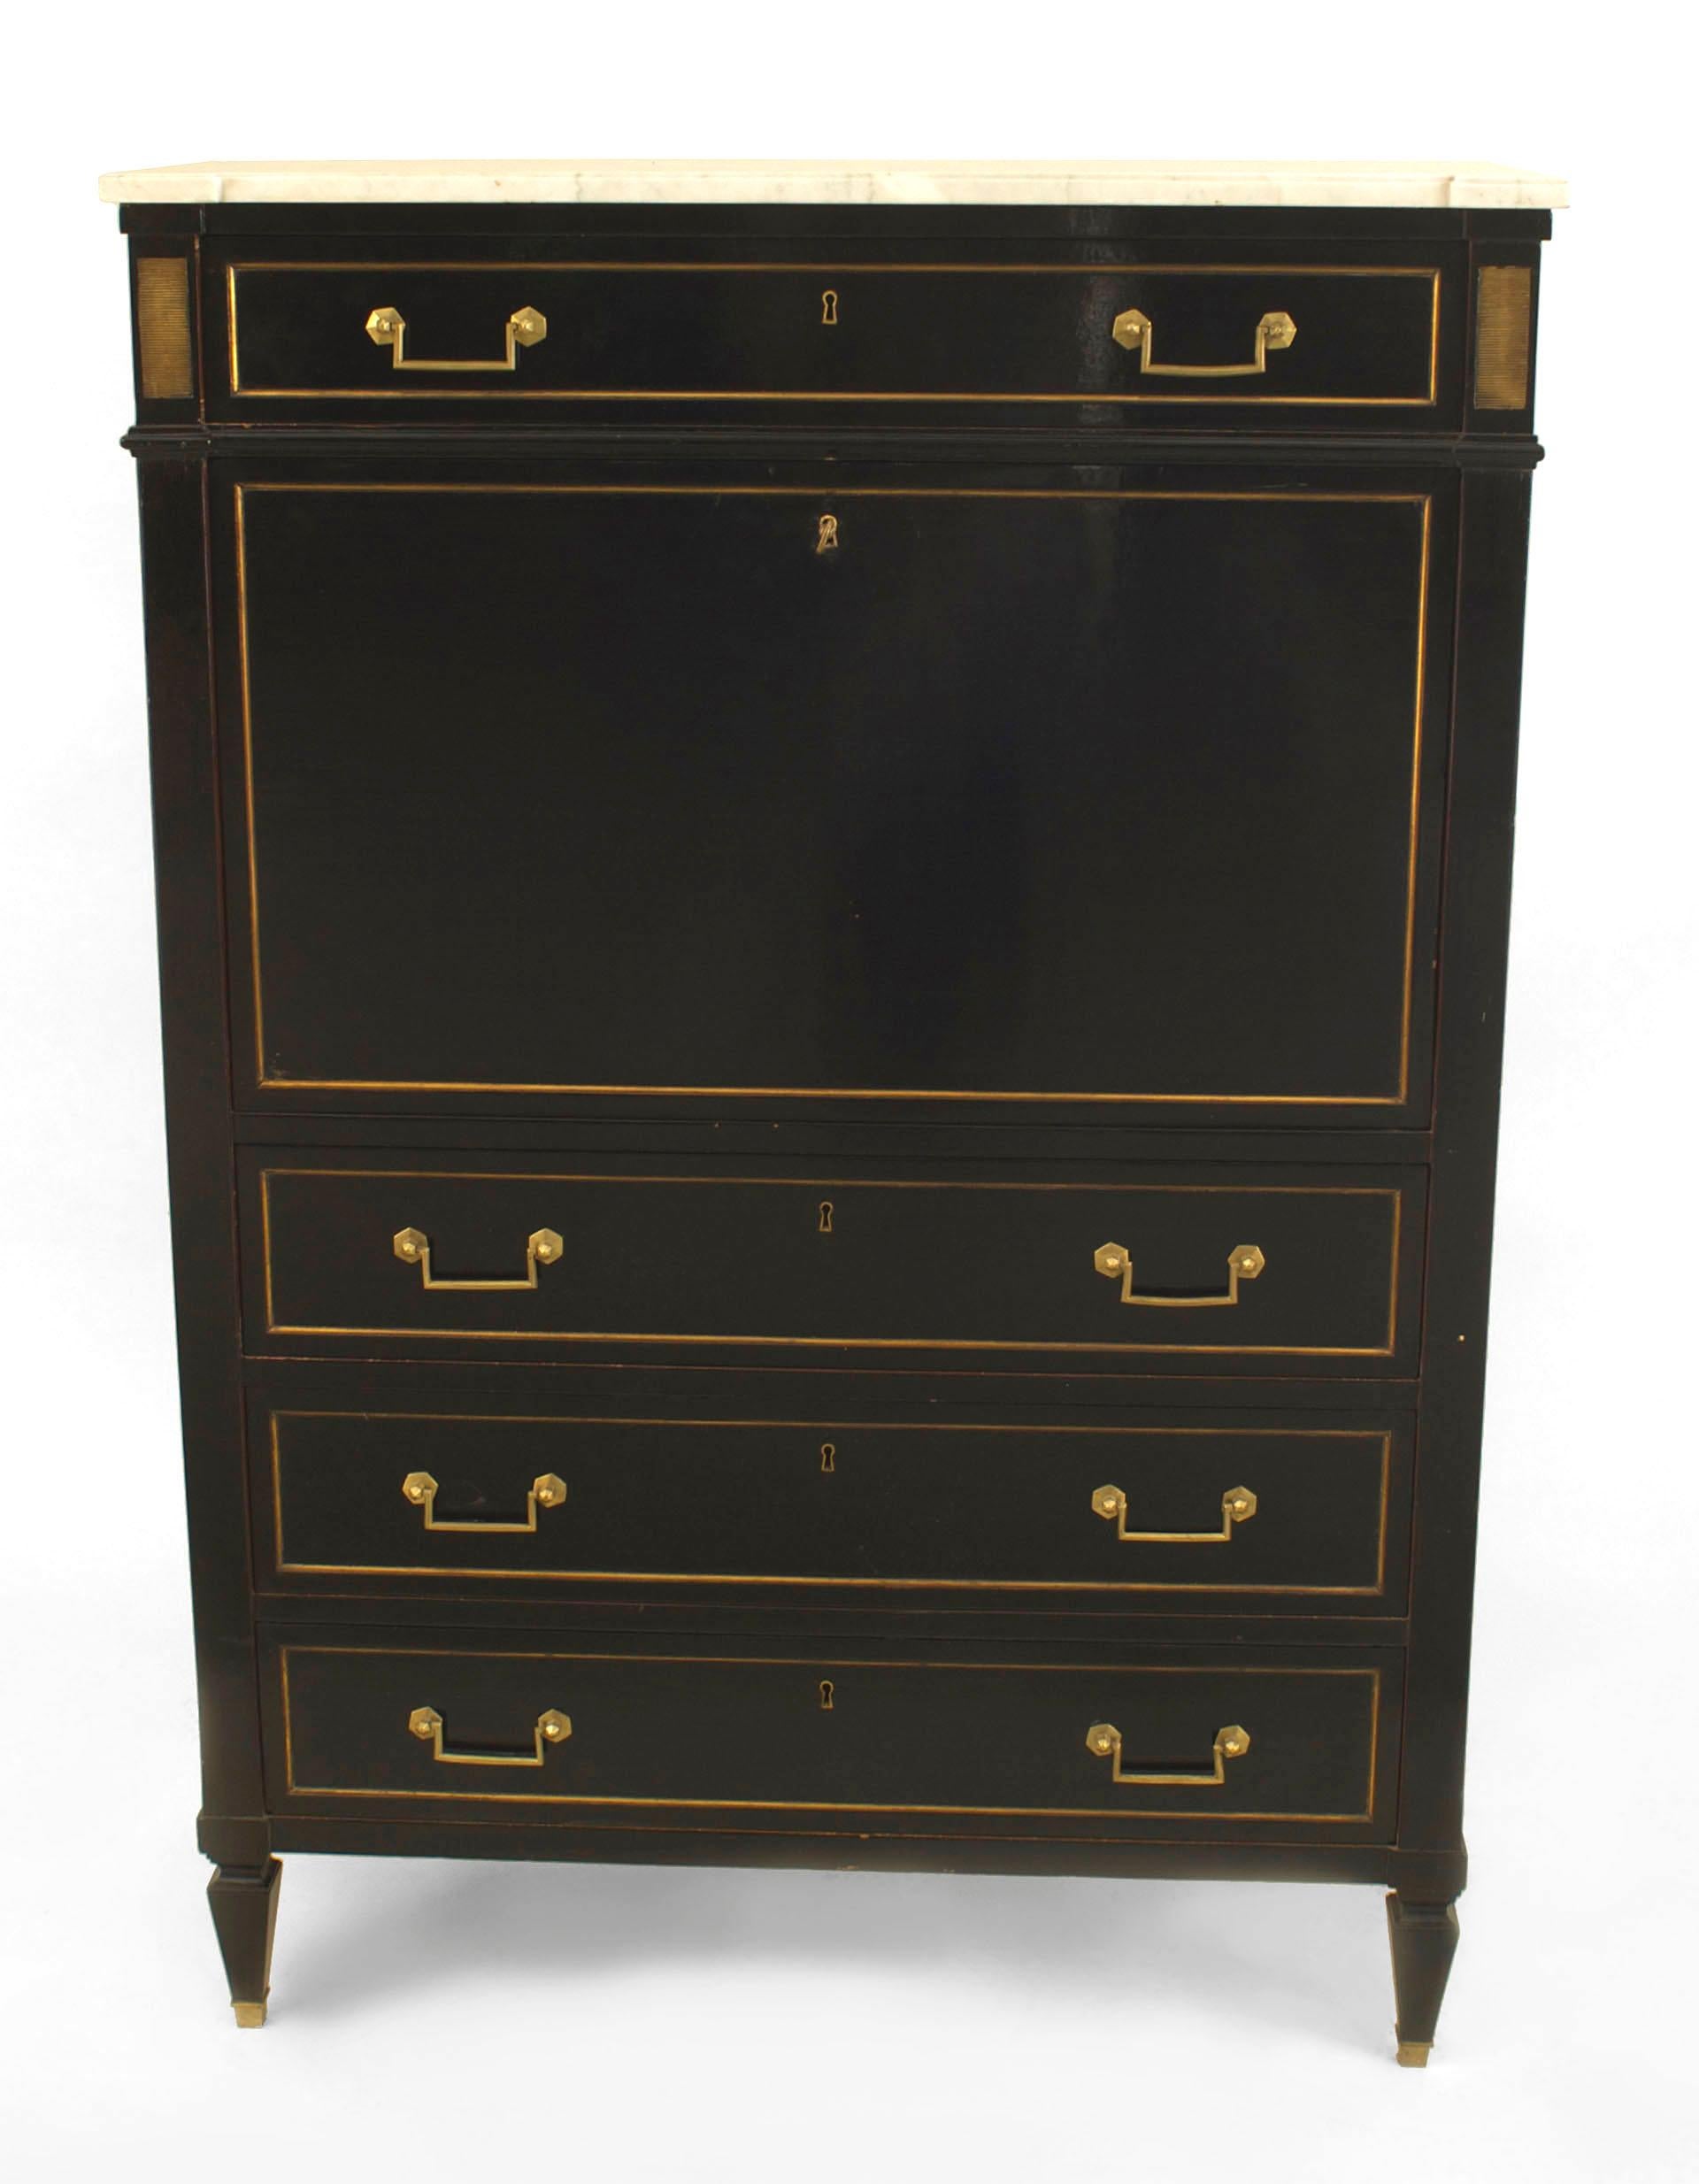 French Louis XVI-style (1940s) ebonized & bronze trim abbatant form desk with a drop front interior above 3 drawers and below a single drawer & a white marble top. (stamped: JANSEN)
